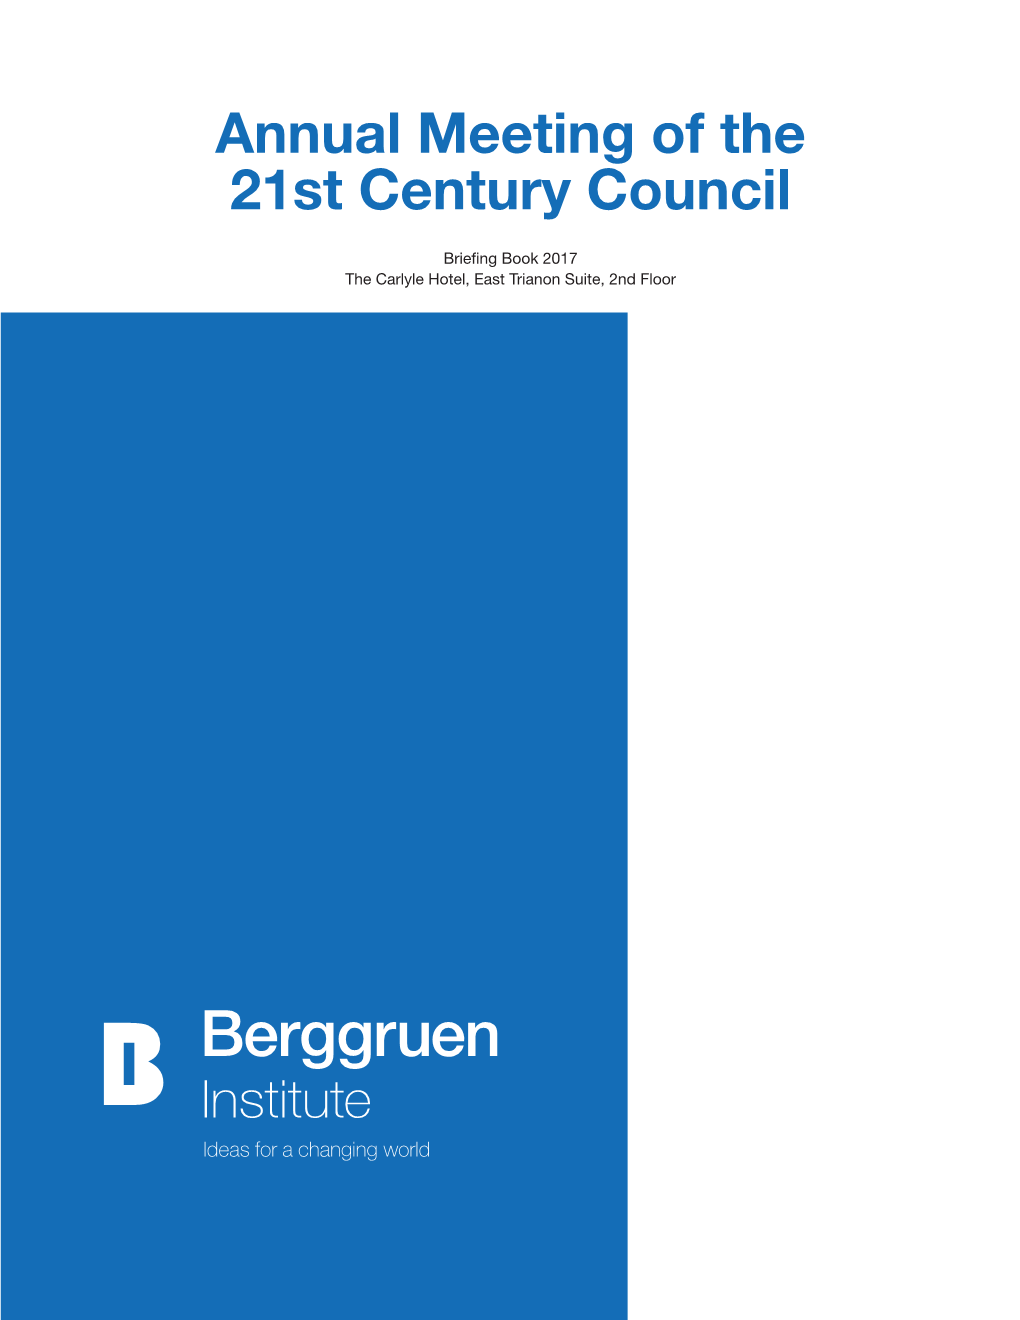 Annual Meeting of the 21St Century Council